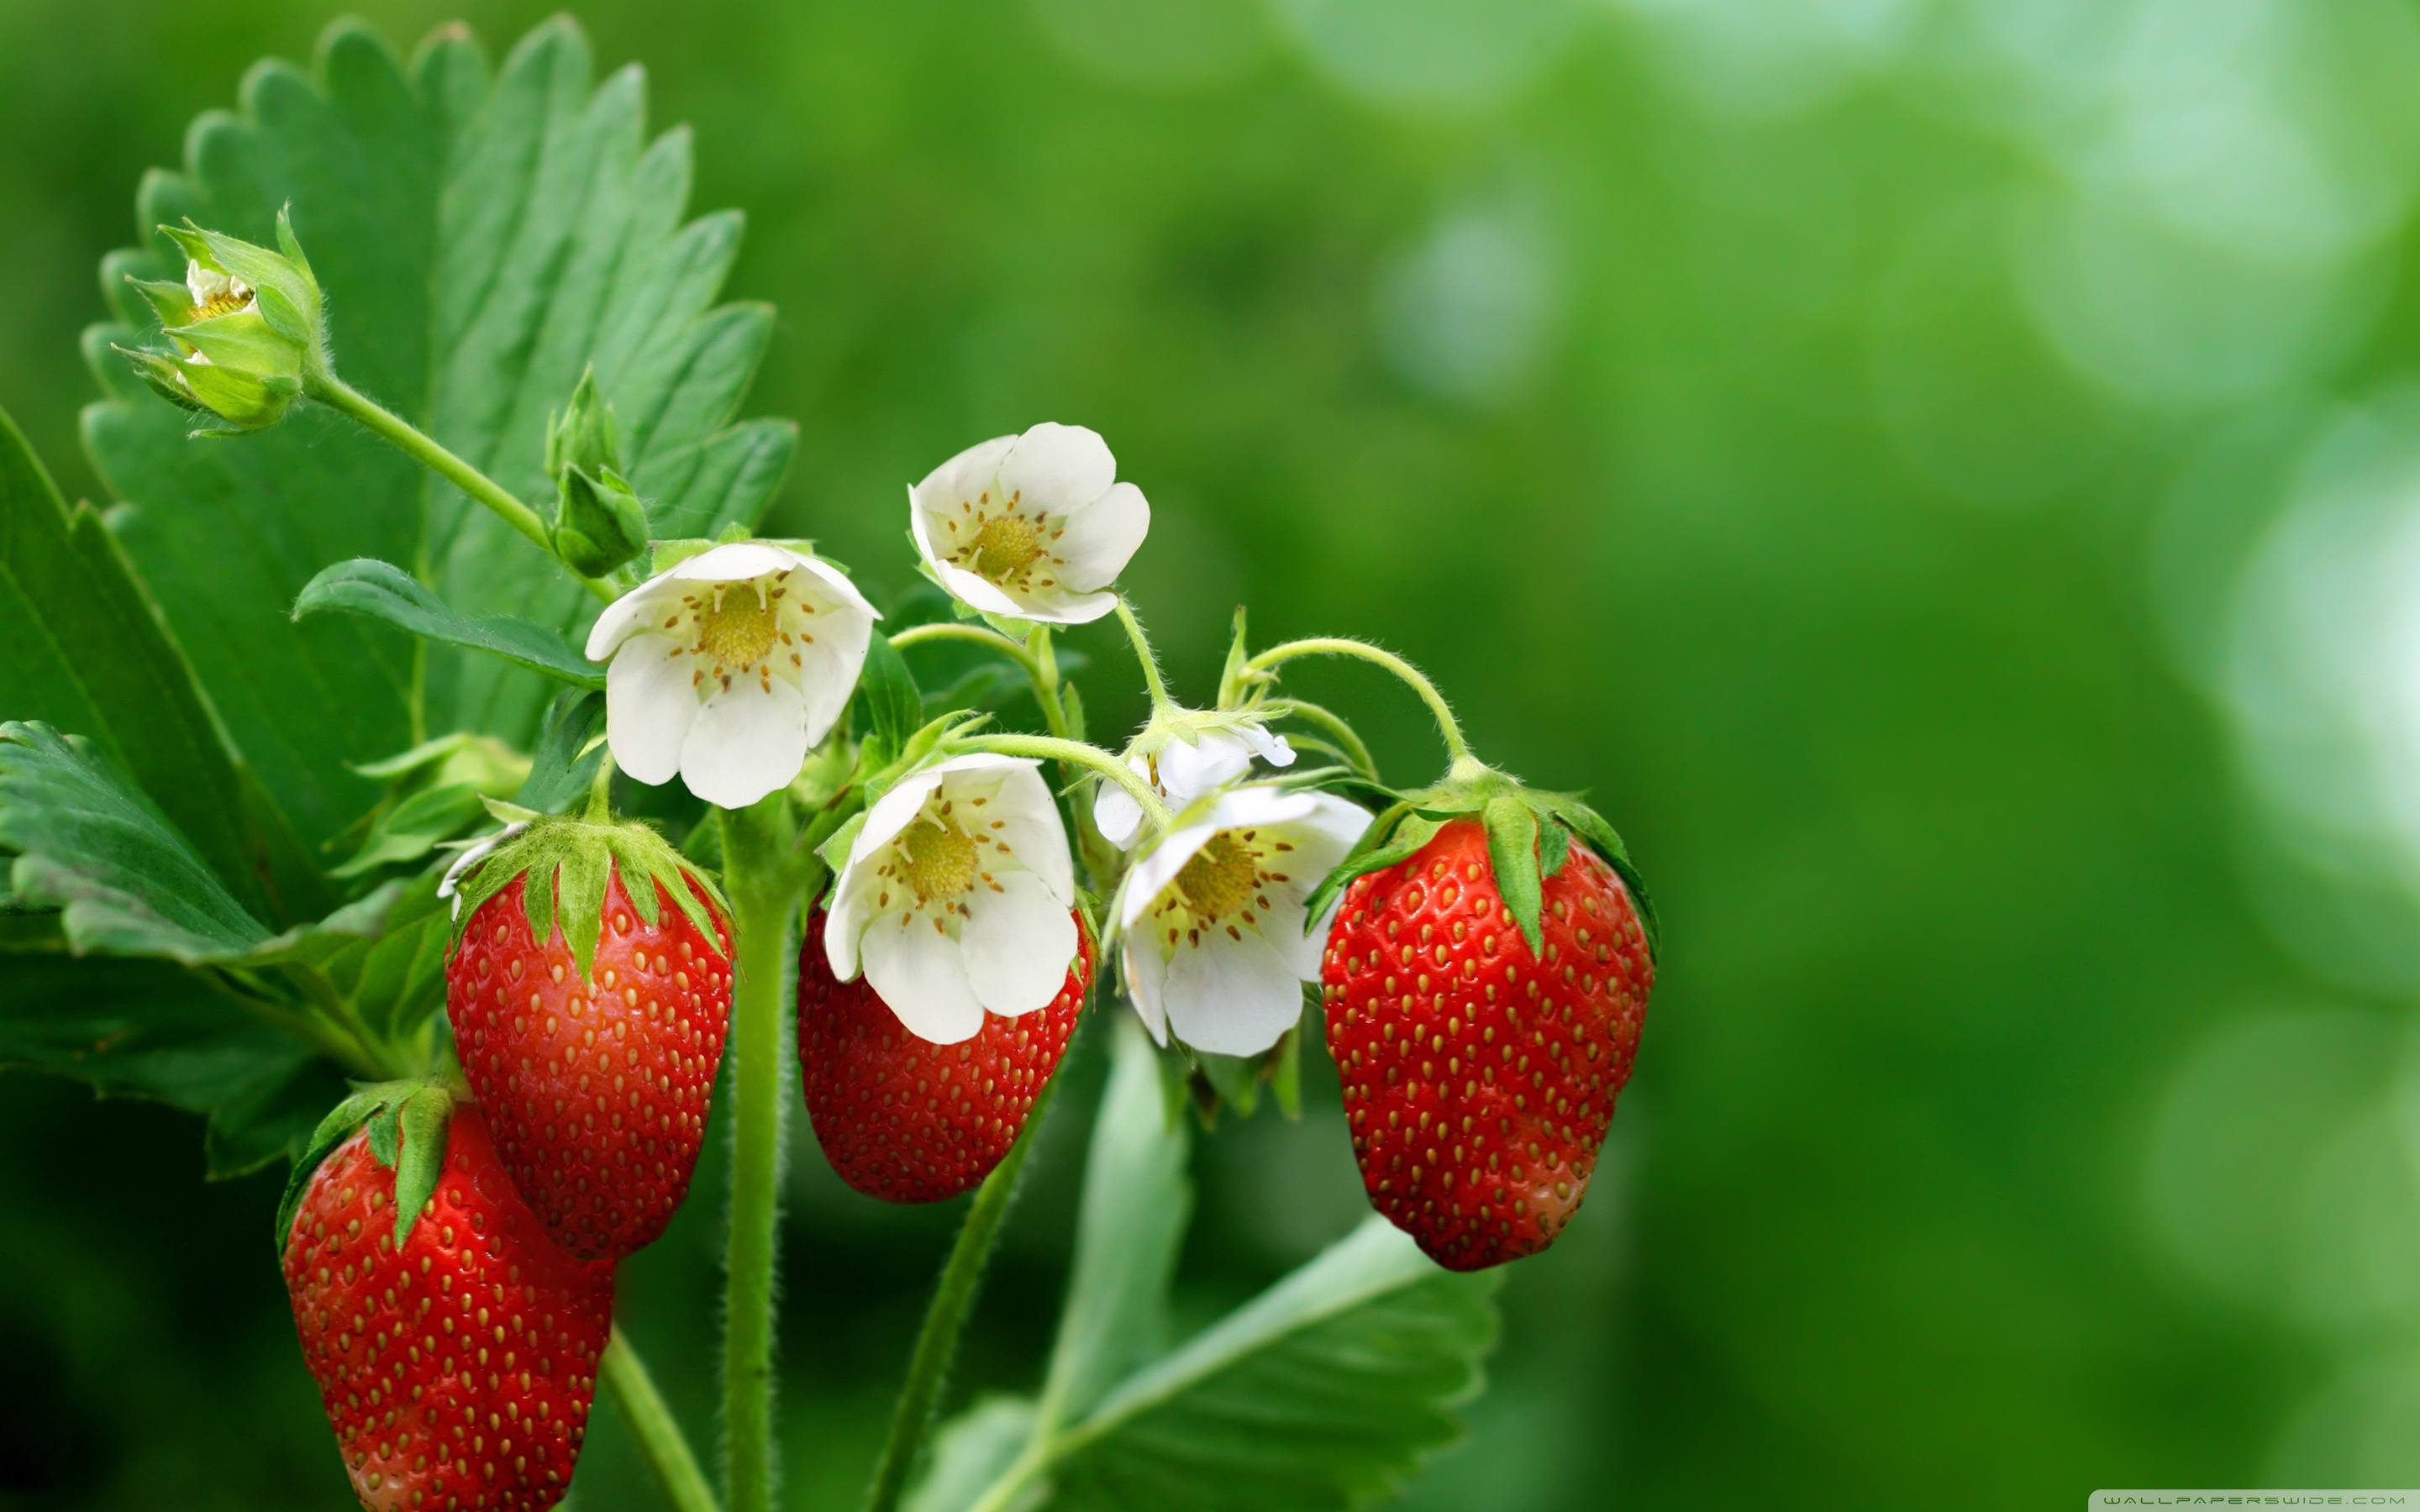 Strawberry Plant with Flowers and Fruits ❤ 4K HD Desktop Wallpaper ...